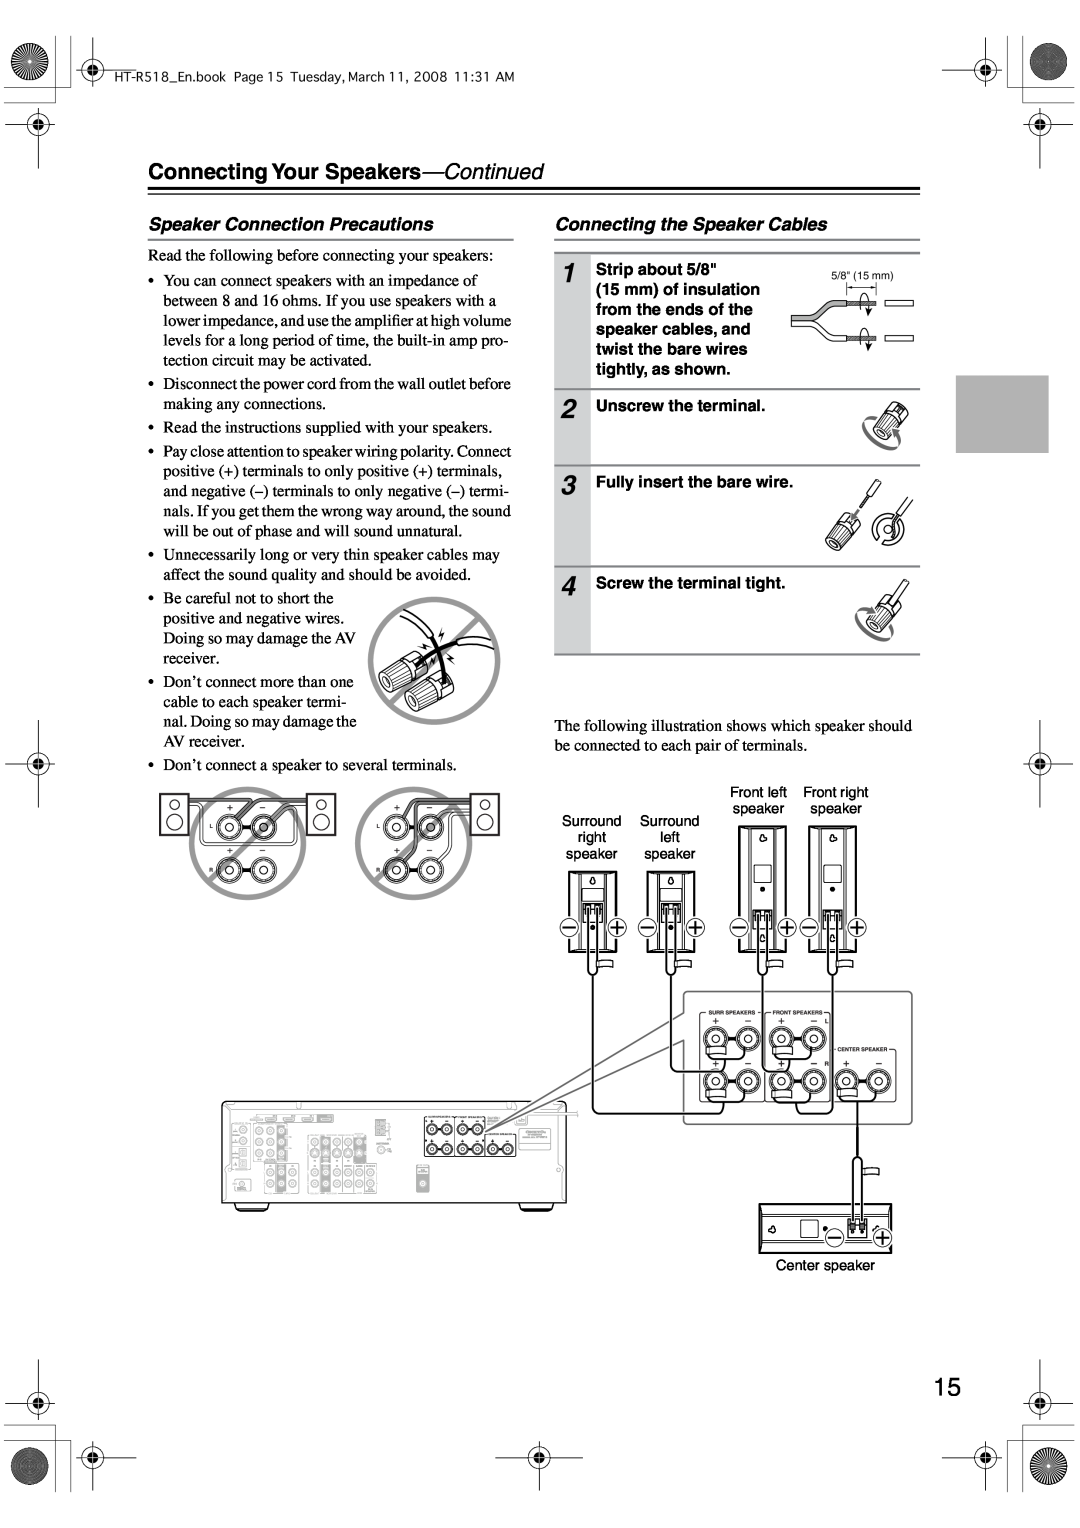 Onkyo HT-R518 Speaker Connection Precautions, Connecting the Speaker Cables, Connecting Your Speakers-Continued 